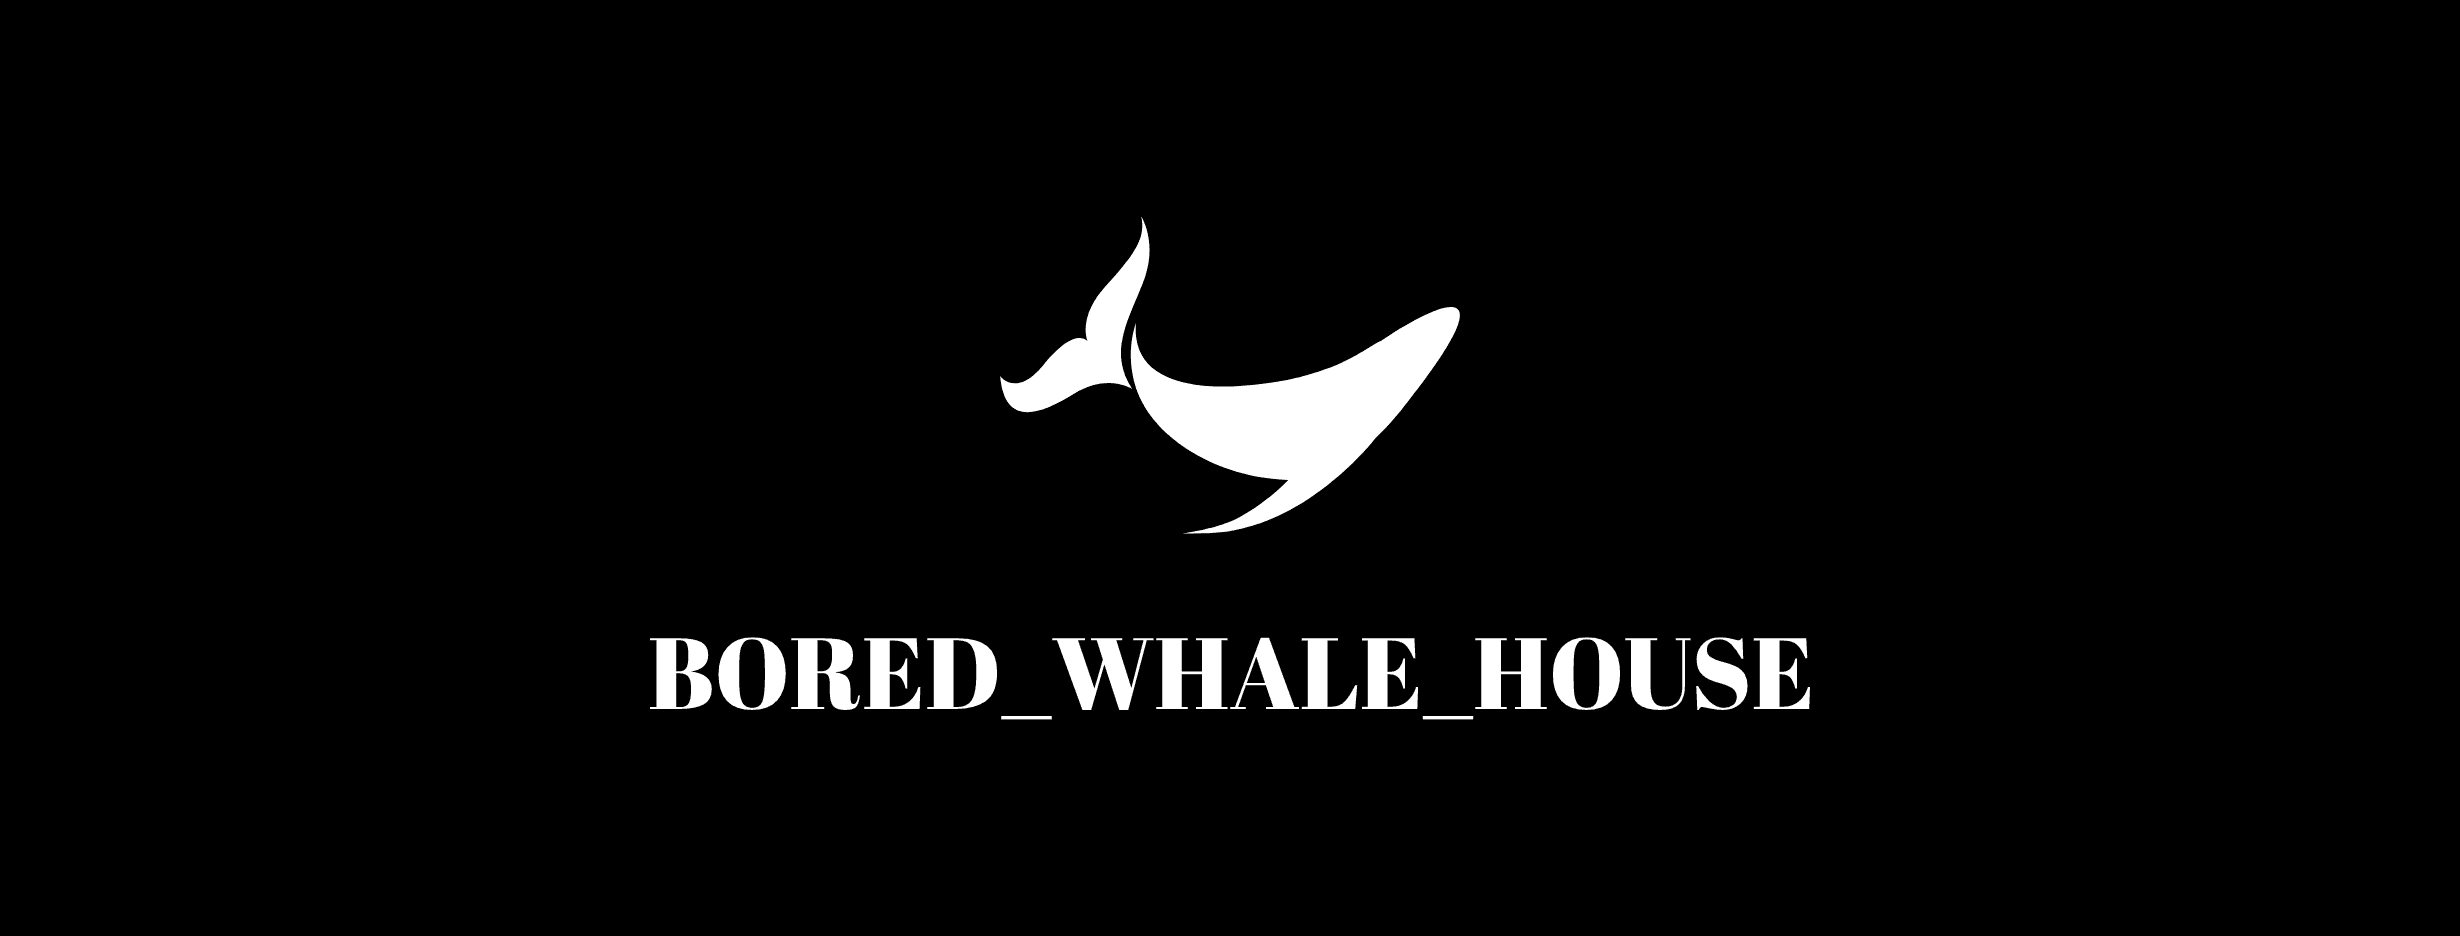 THE_BORED_WHALE 横幅